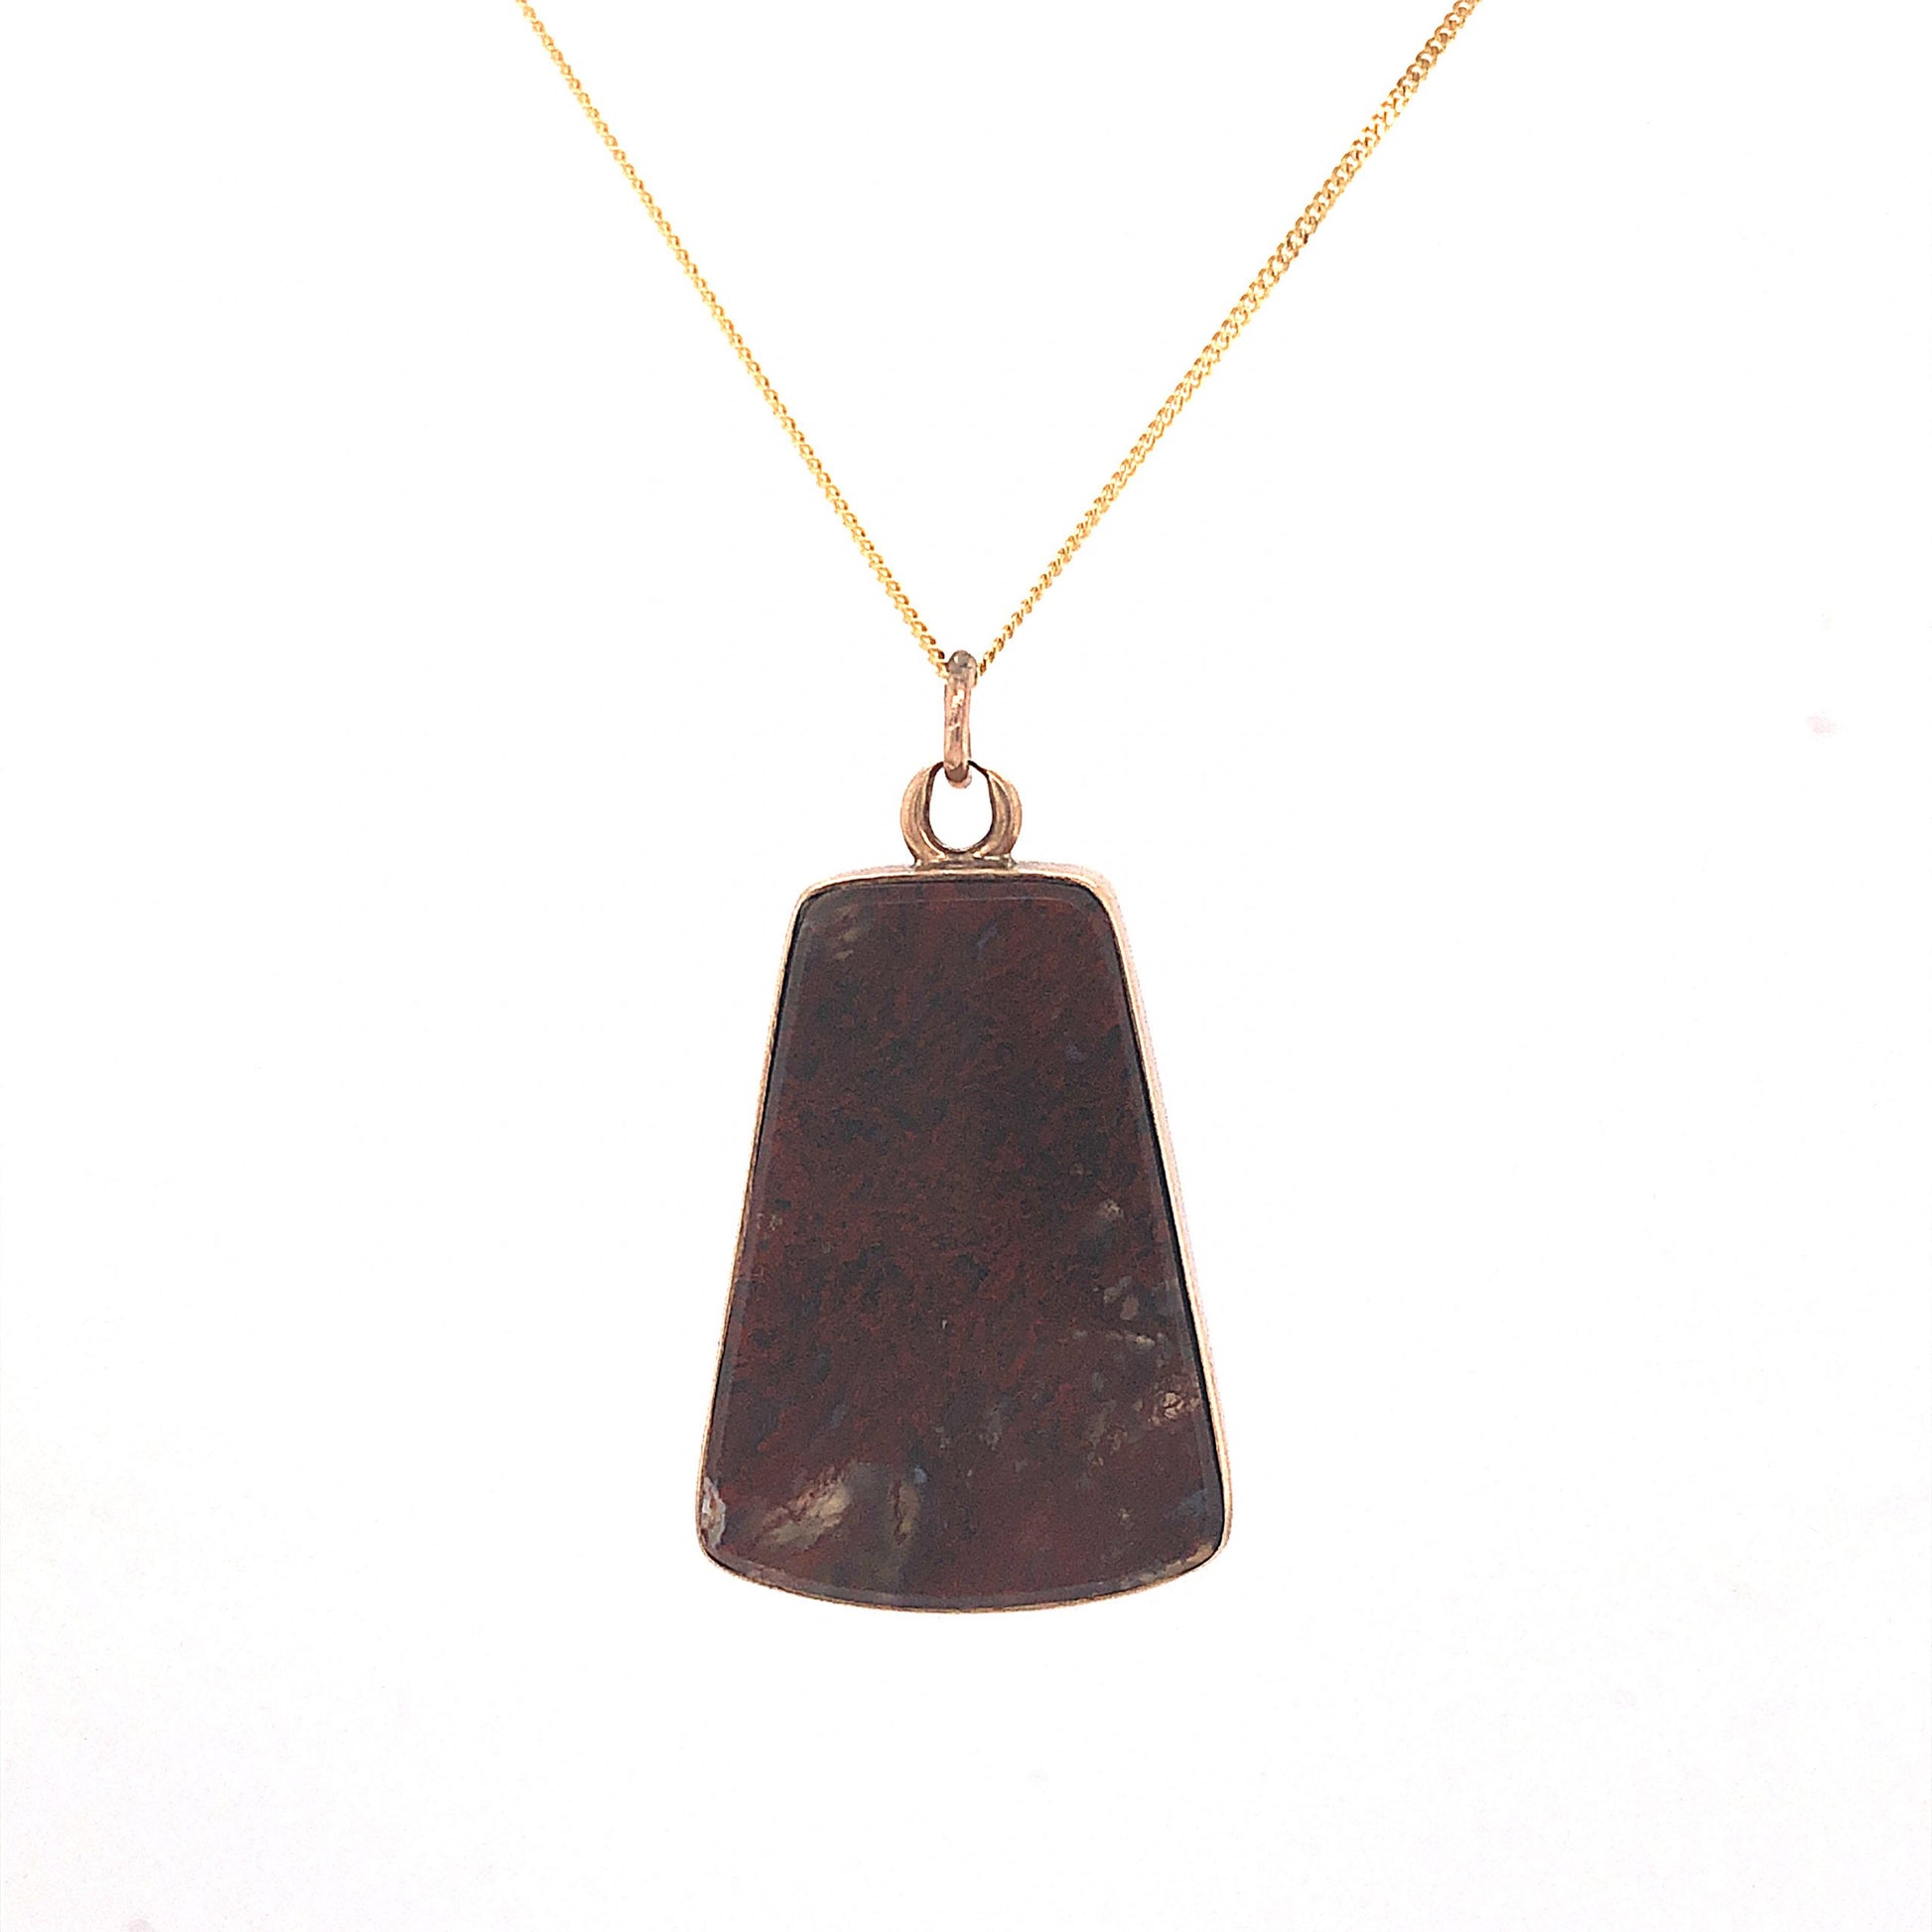 Victorian Bloodstone Slab Pendant Necklace in 14k Yellow GoldComposition: 14 Karat Yellow Gold Total Gram Weight: 11.0 g Inscription: 14k
      